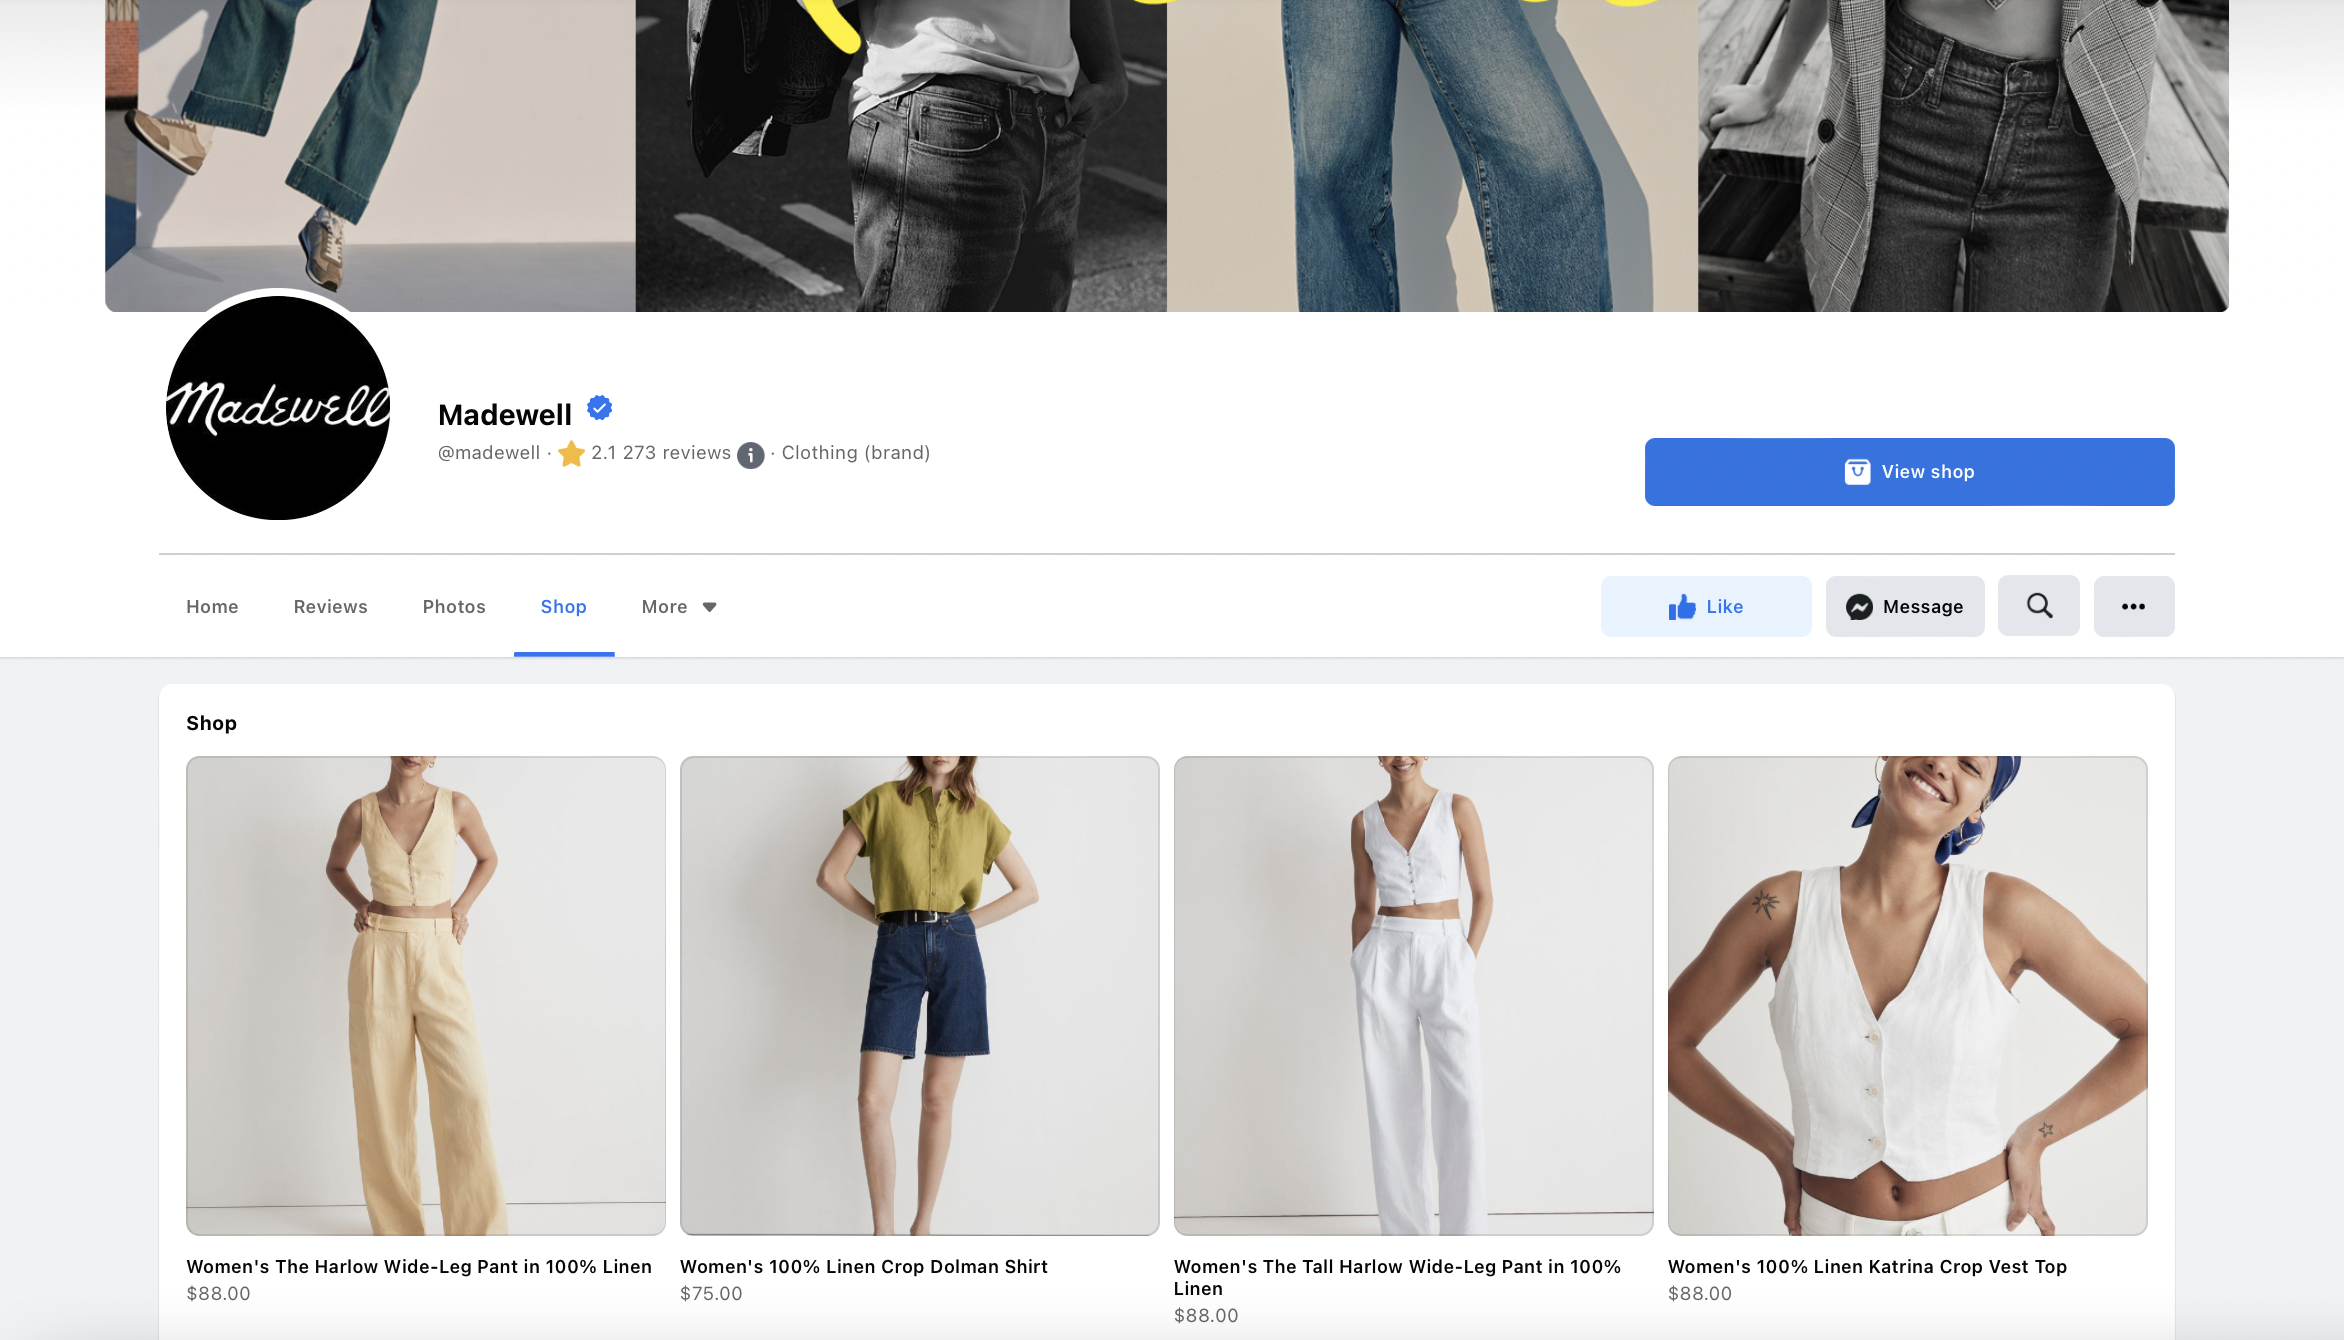 Facebook Shop for Madewell showcasing different clothing for women.